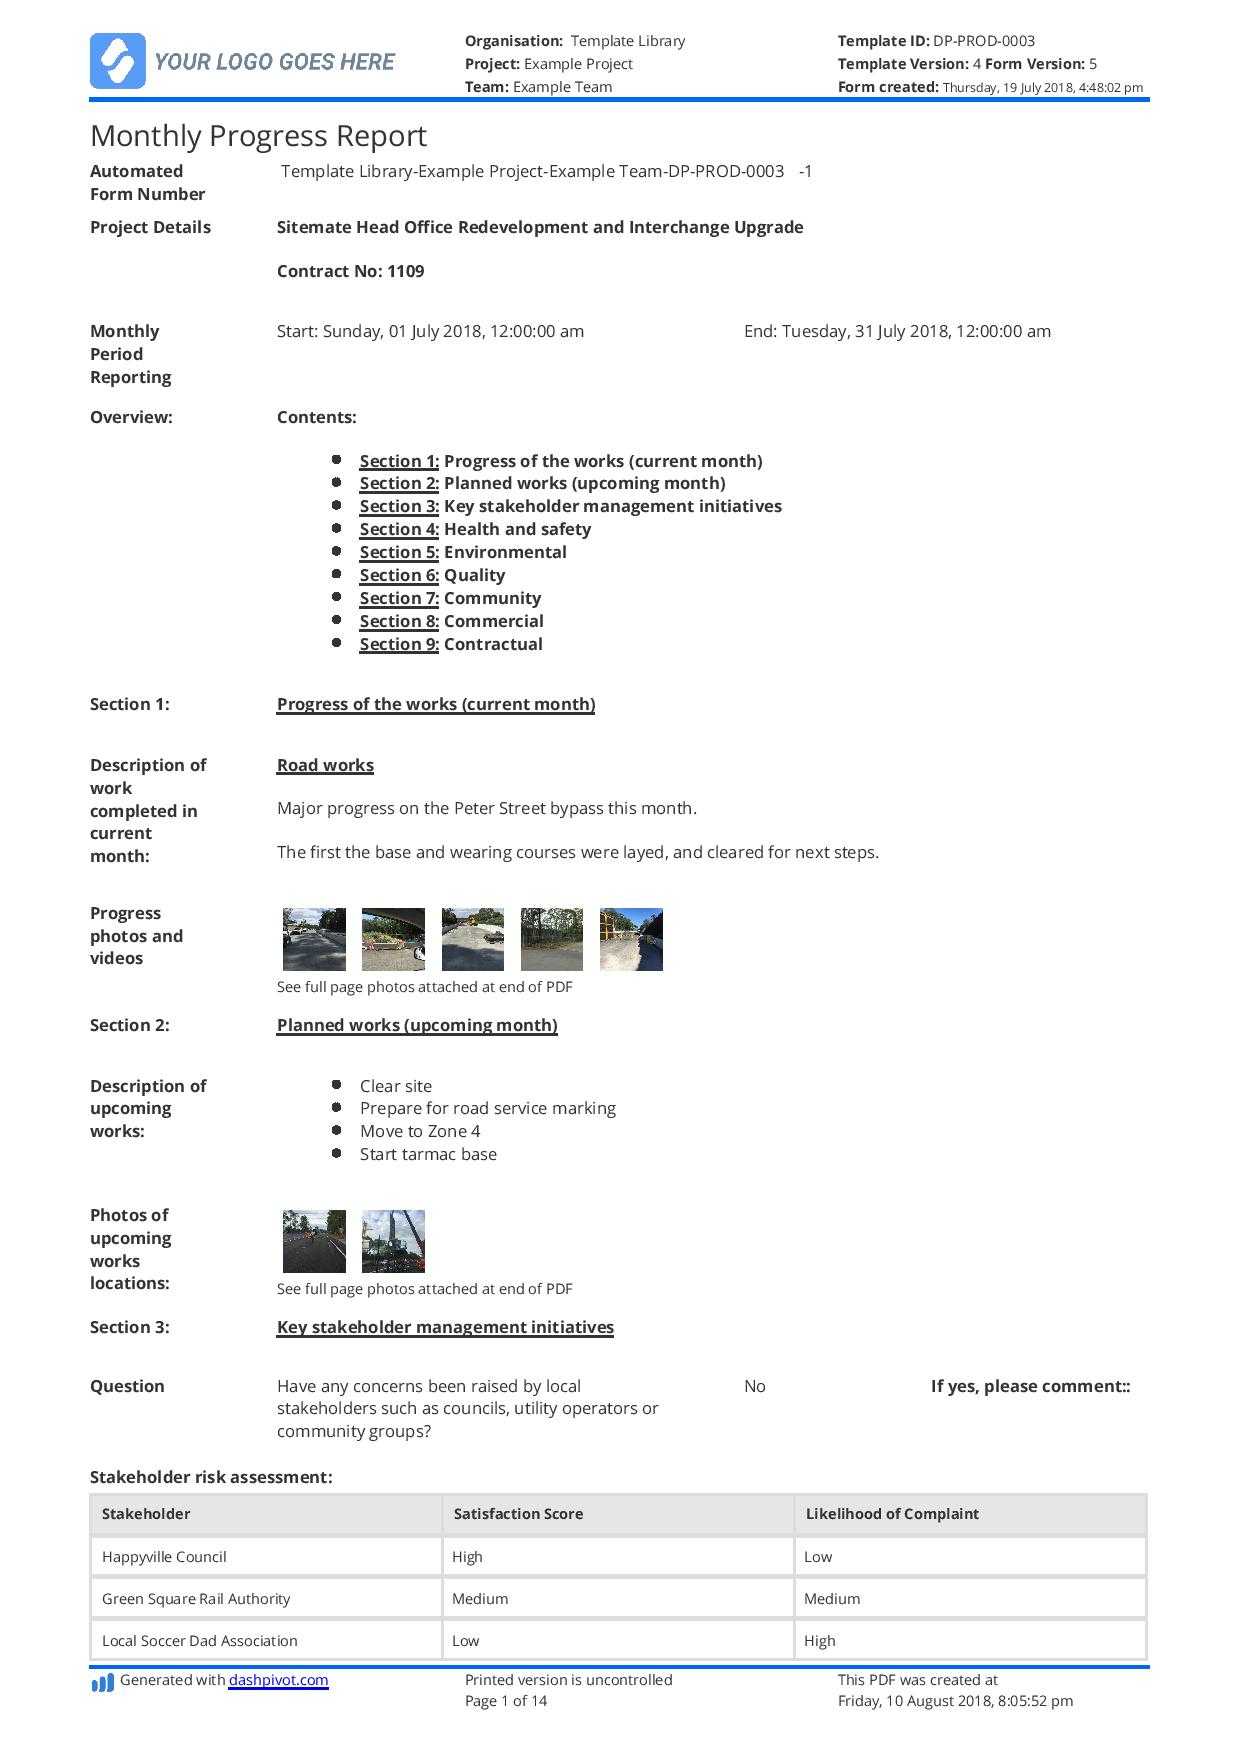 Monthly Construction Progress Report Template: Use This Regarding Monthly Progress Report Template